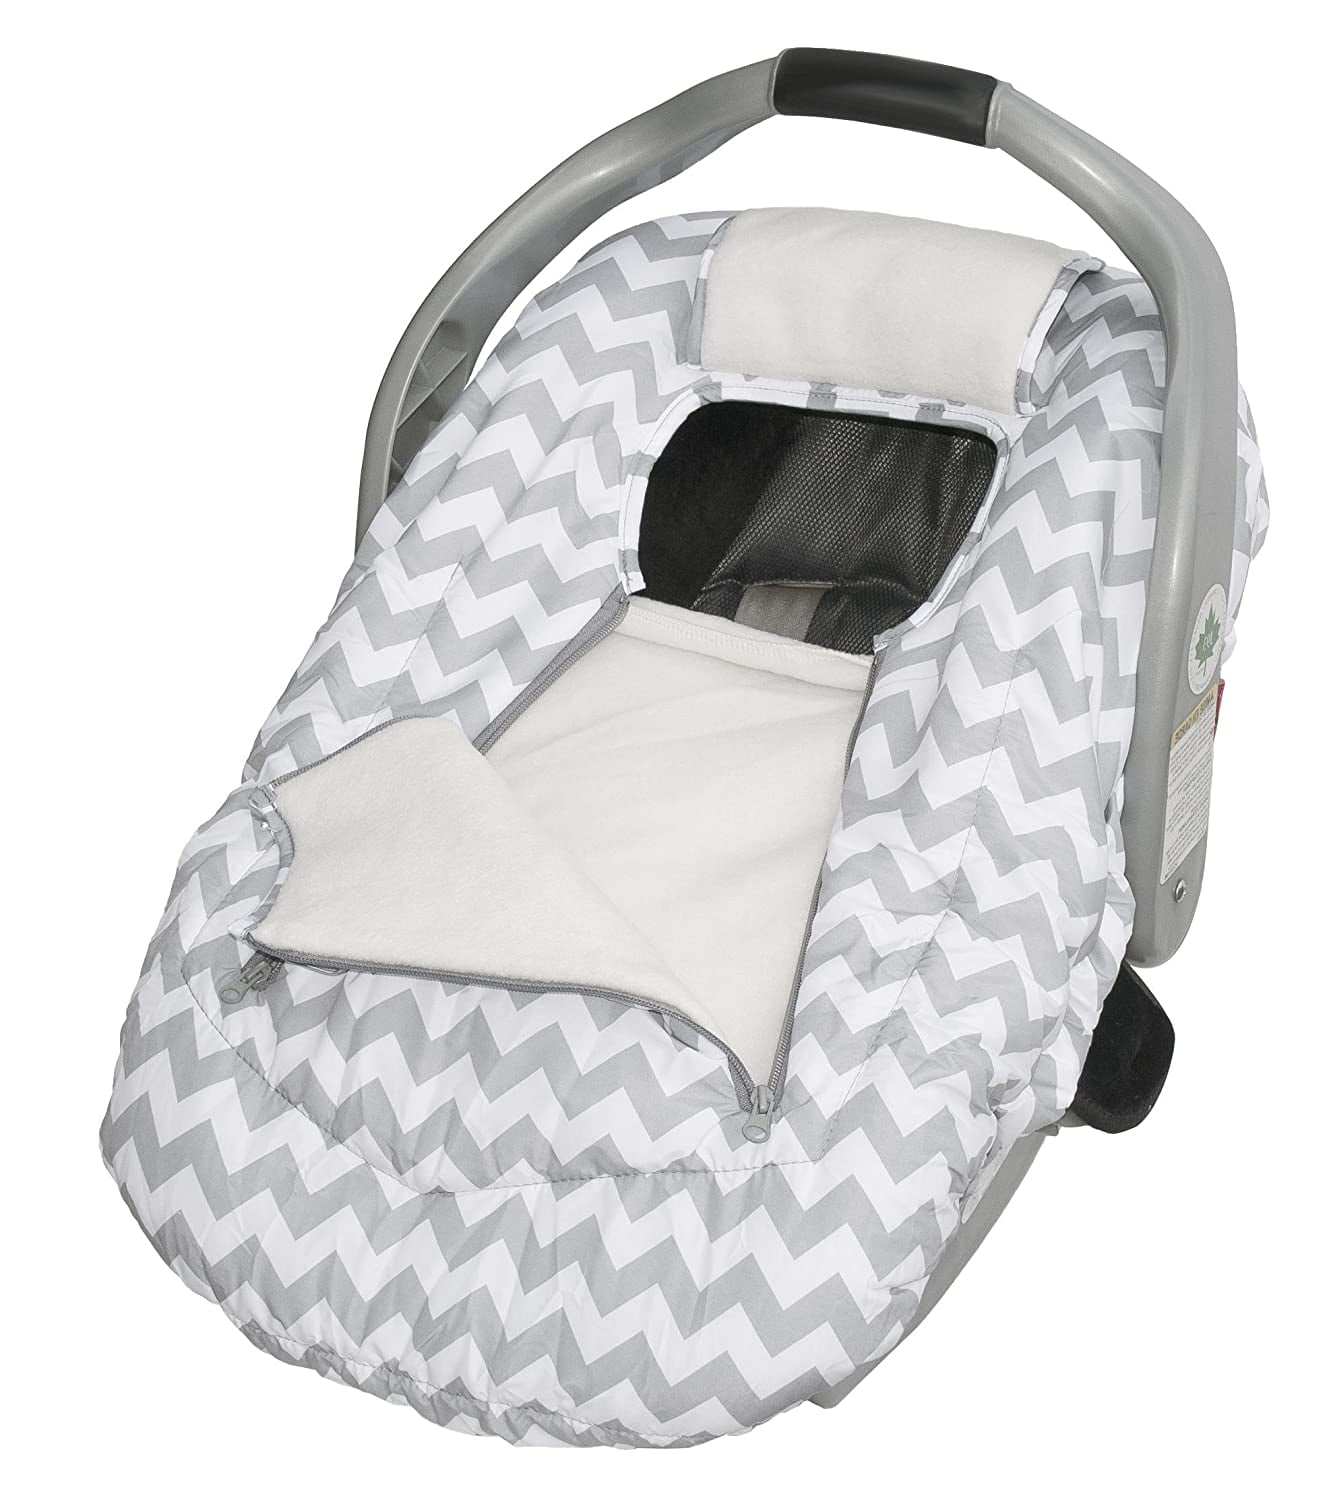 Jolly Jumper Arctic Sneak-A-Peek Infant CarSeat Cover with Attached  Blanket, Weatherproof (Gray Chevron)